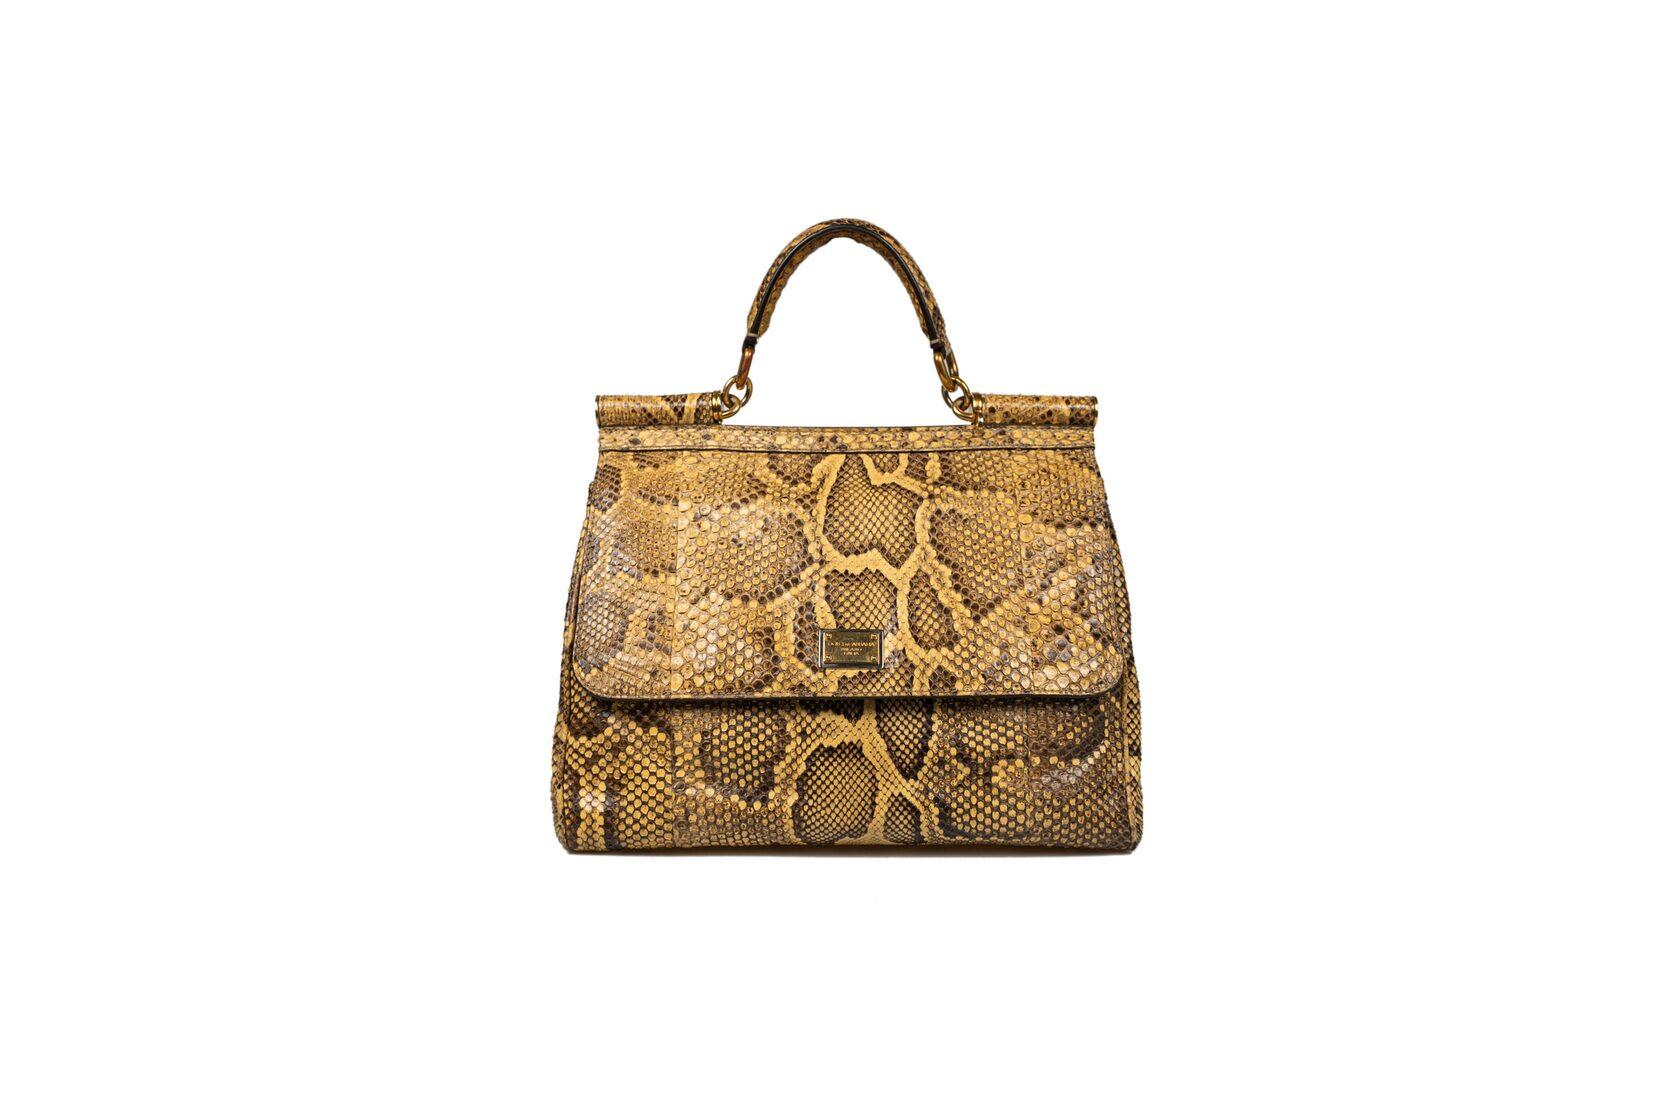 Dolce Gabbana Sicily Tote Bag Python Leather For Sale 8